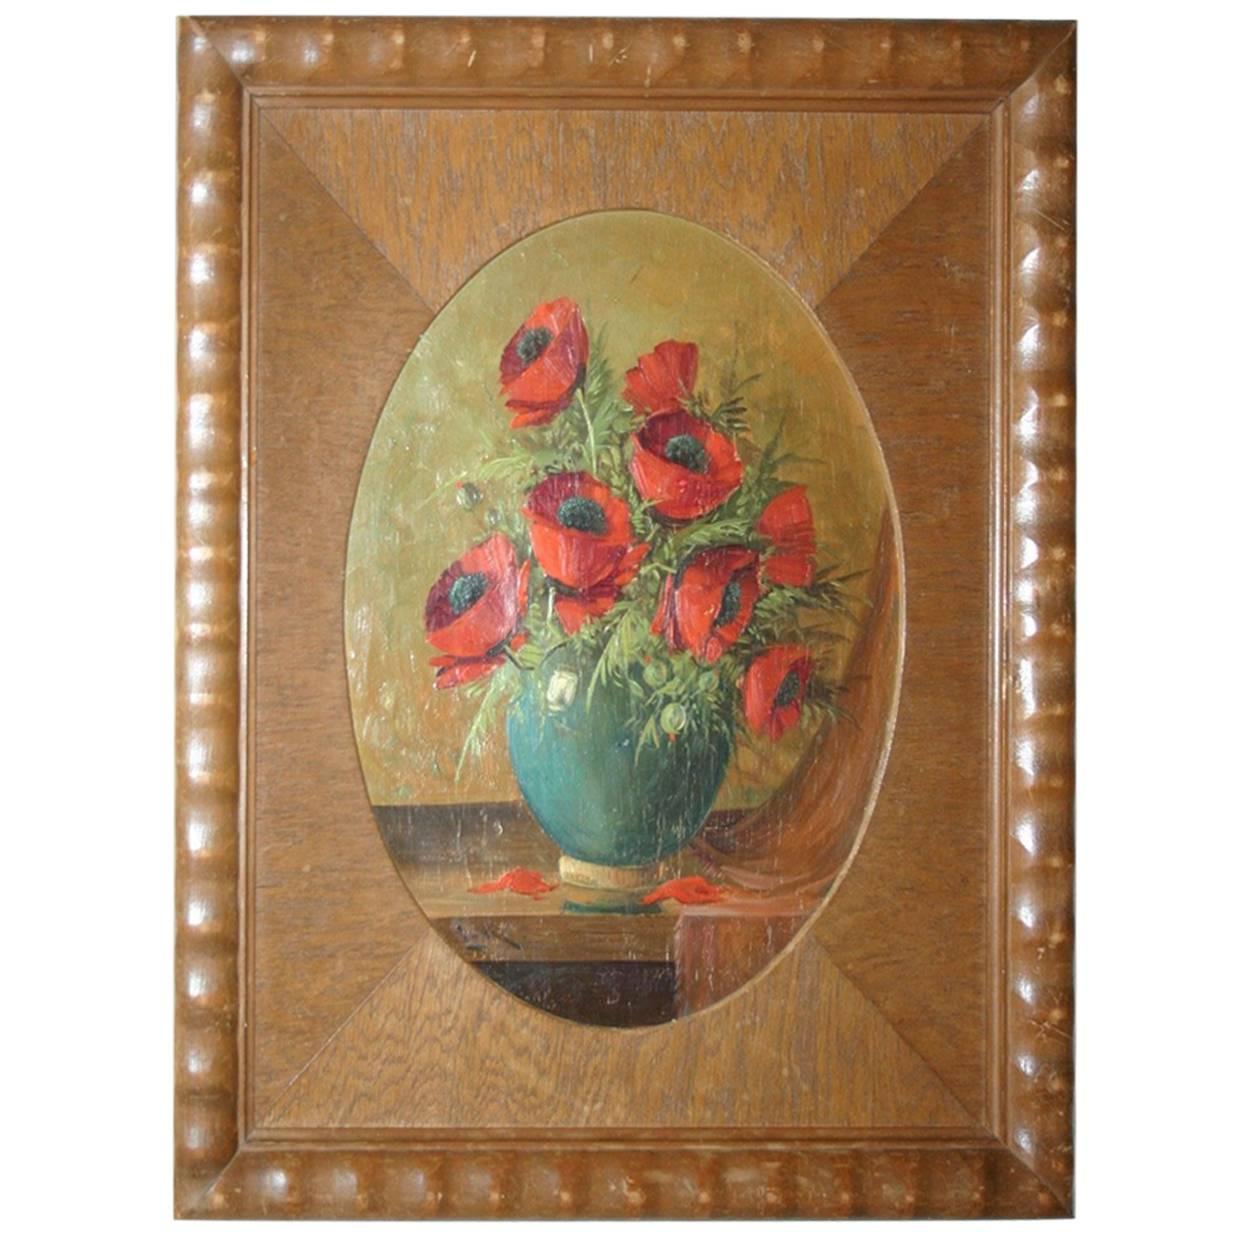 1920s Painting on Wood Poppy Bouquet in Vase in Art Deco Passe Partout Frame For Sale